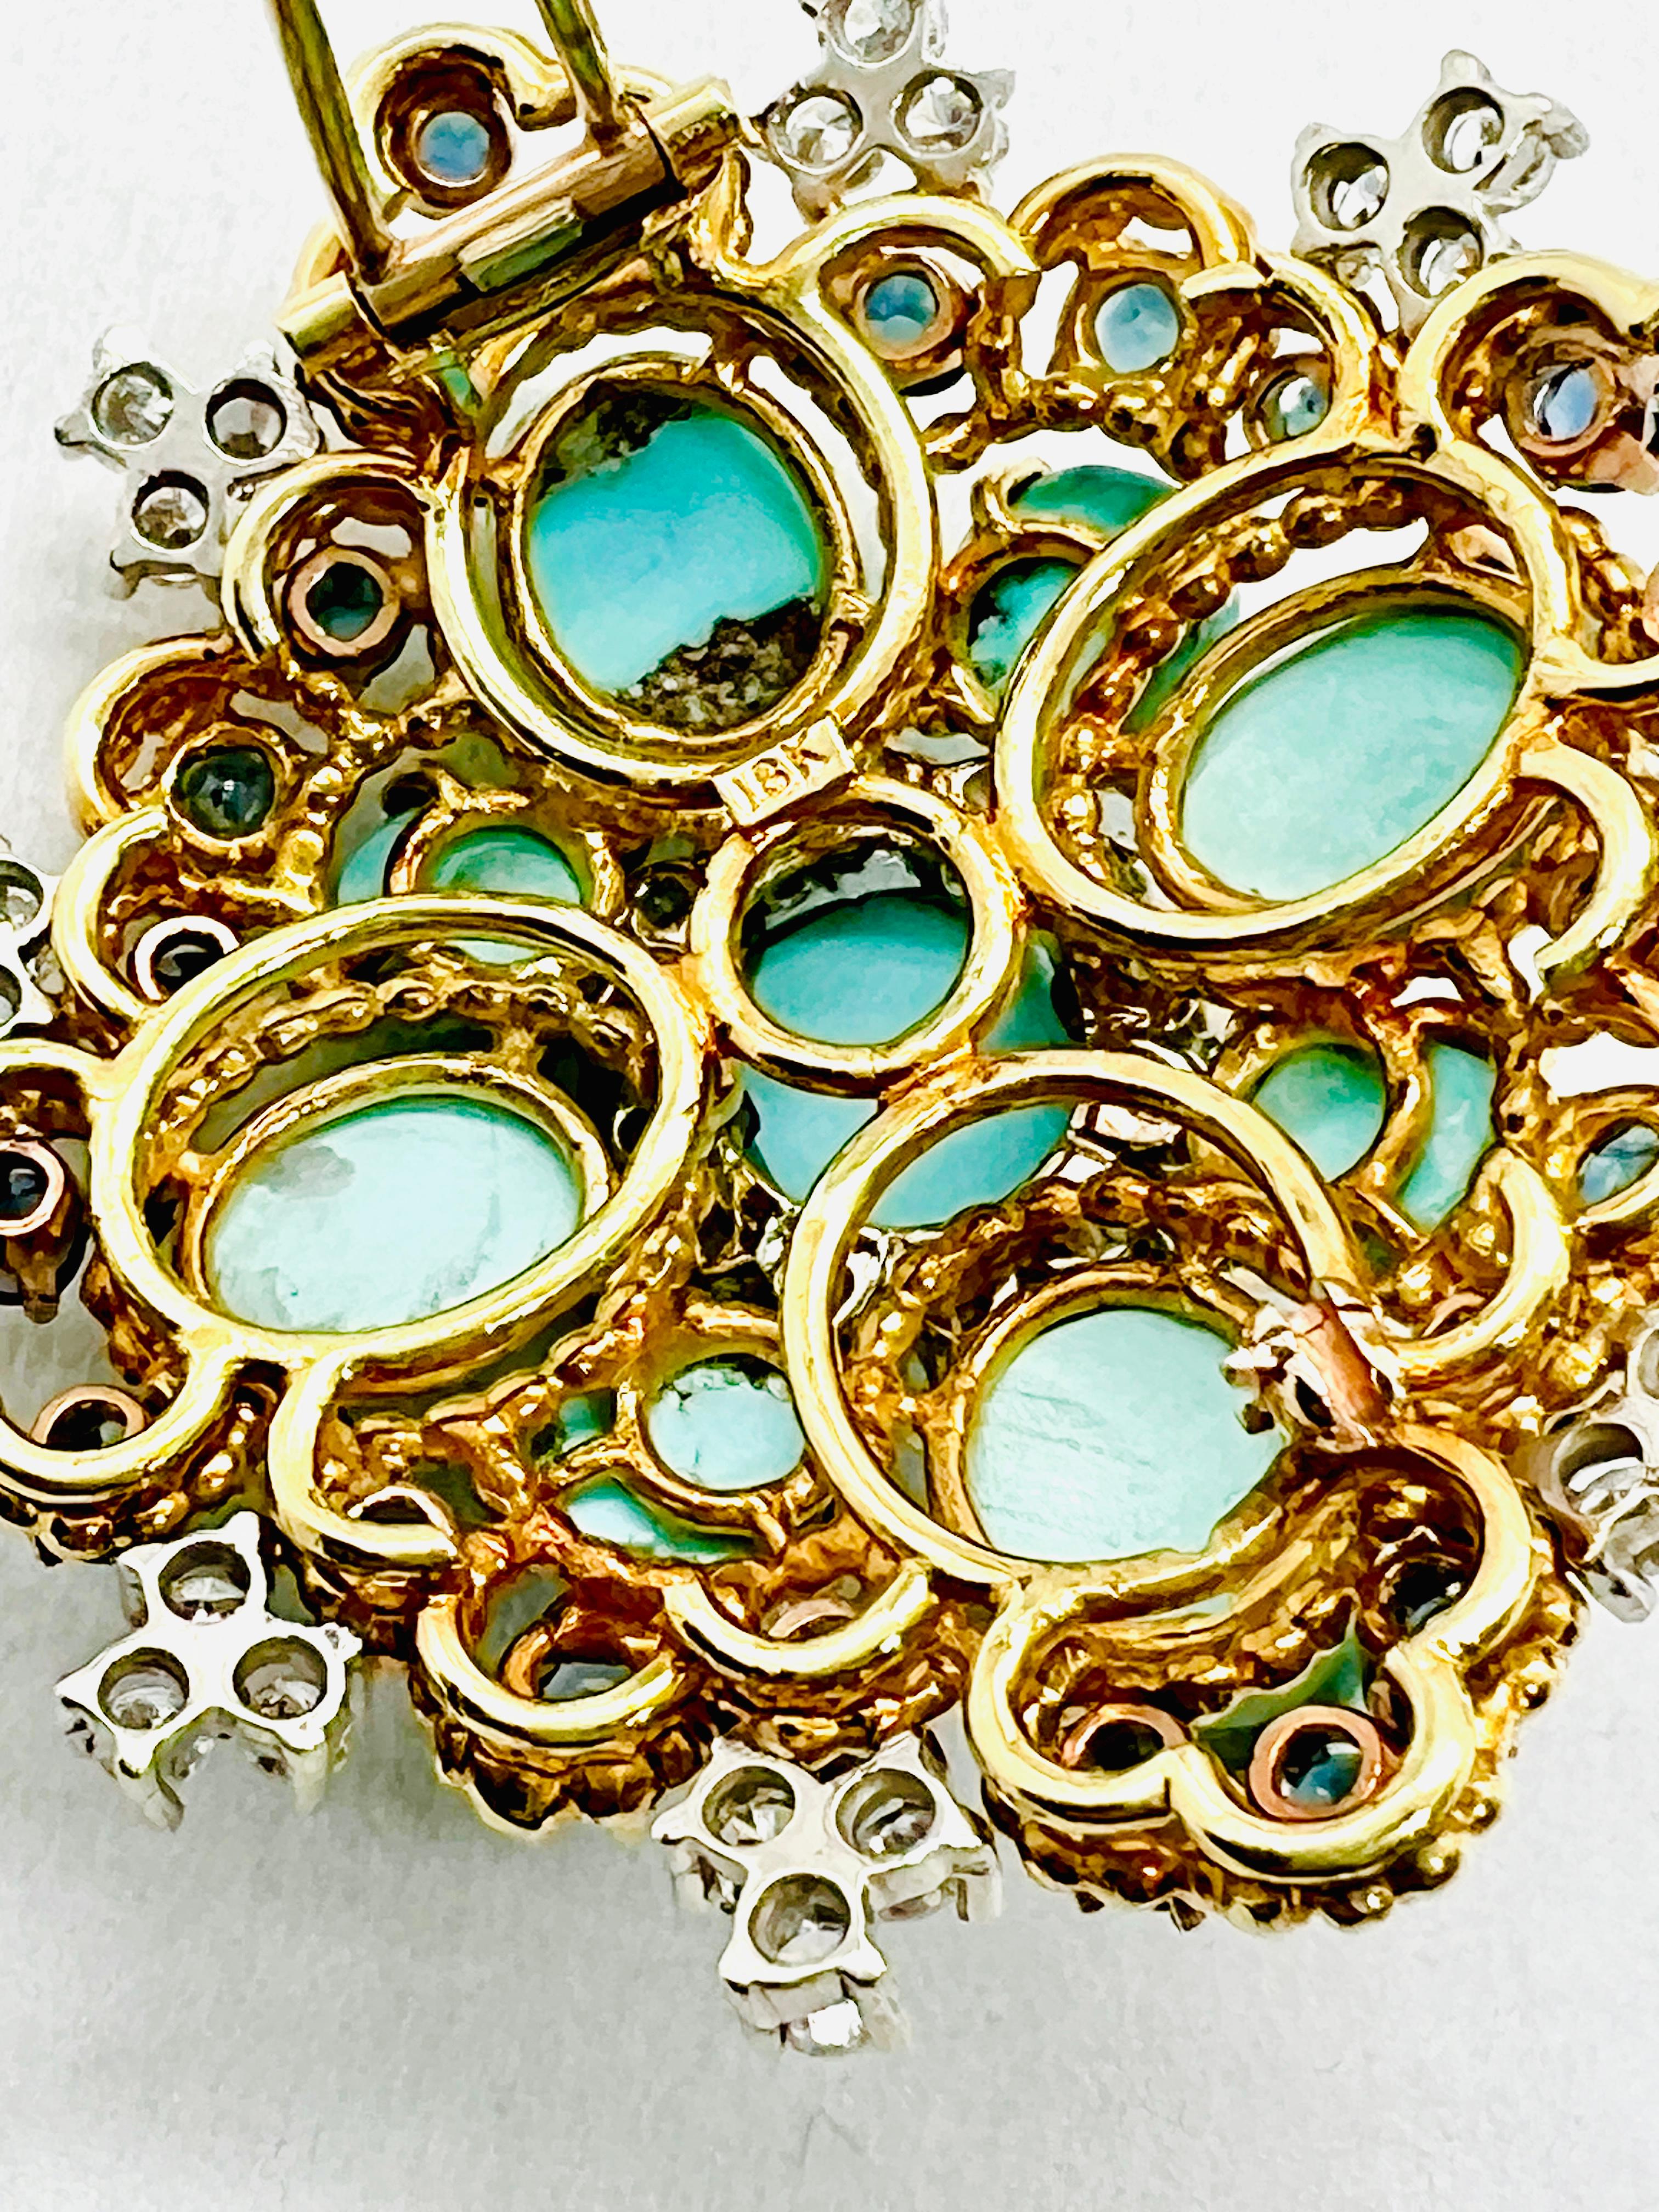 18K yellow Gold Diamond, Turquoise & Sapphire 2 inch Square Brooch For Sale 3